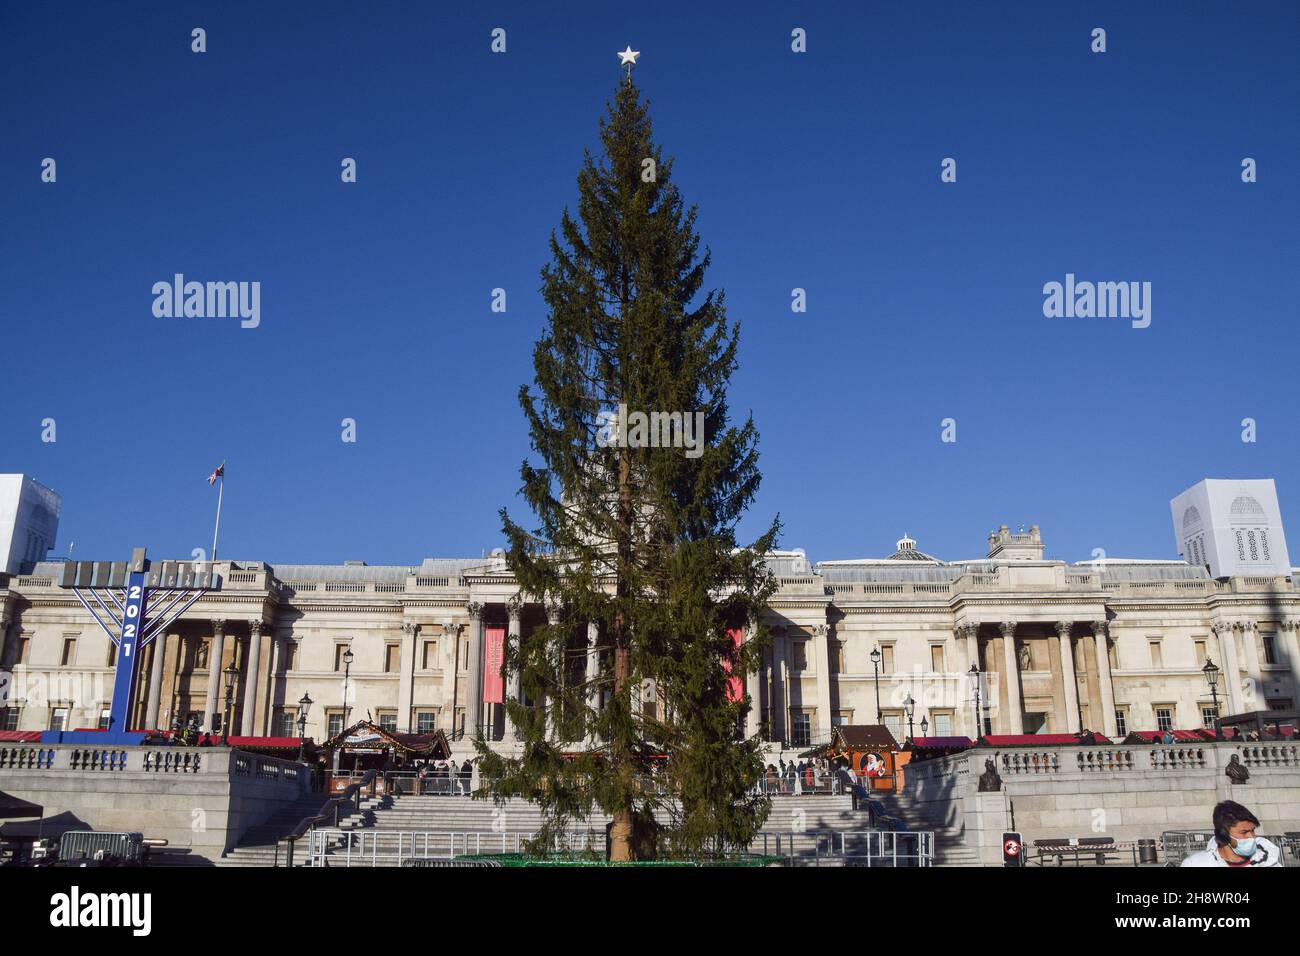 London, UK. 2nd December 2021. This year's Christmas tree at Trafalgar  square has been criticised for being substandard, sparse and thin. The  trees have been sent each year to Britain as a